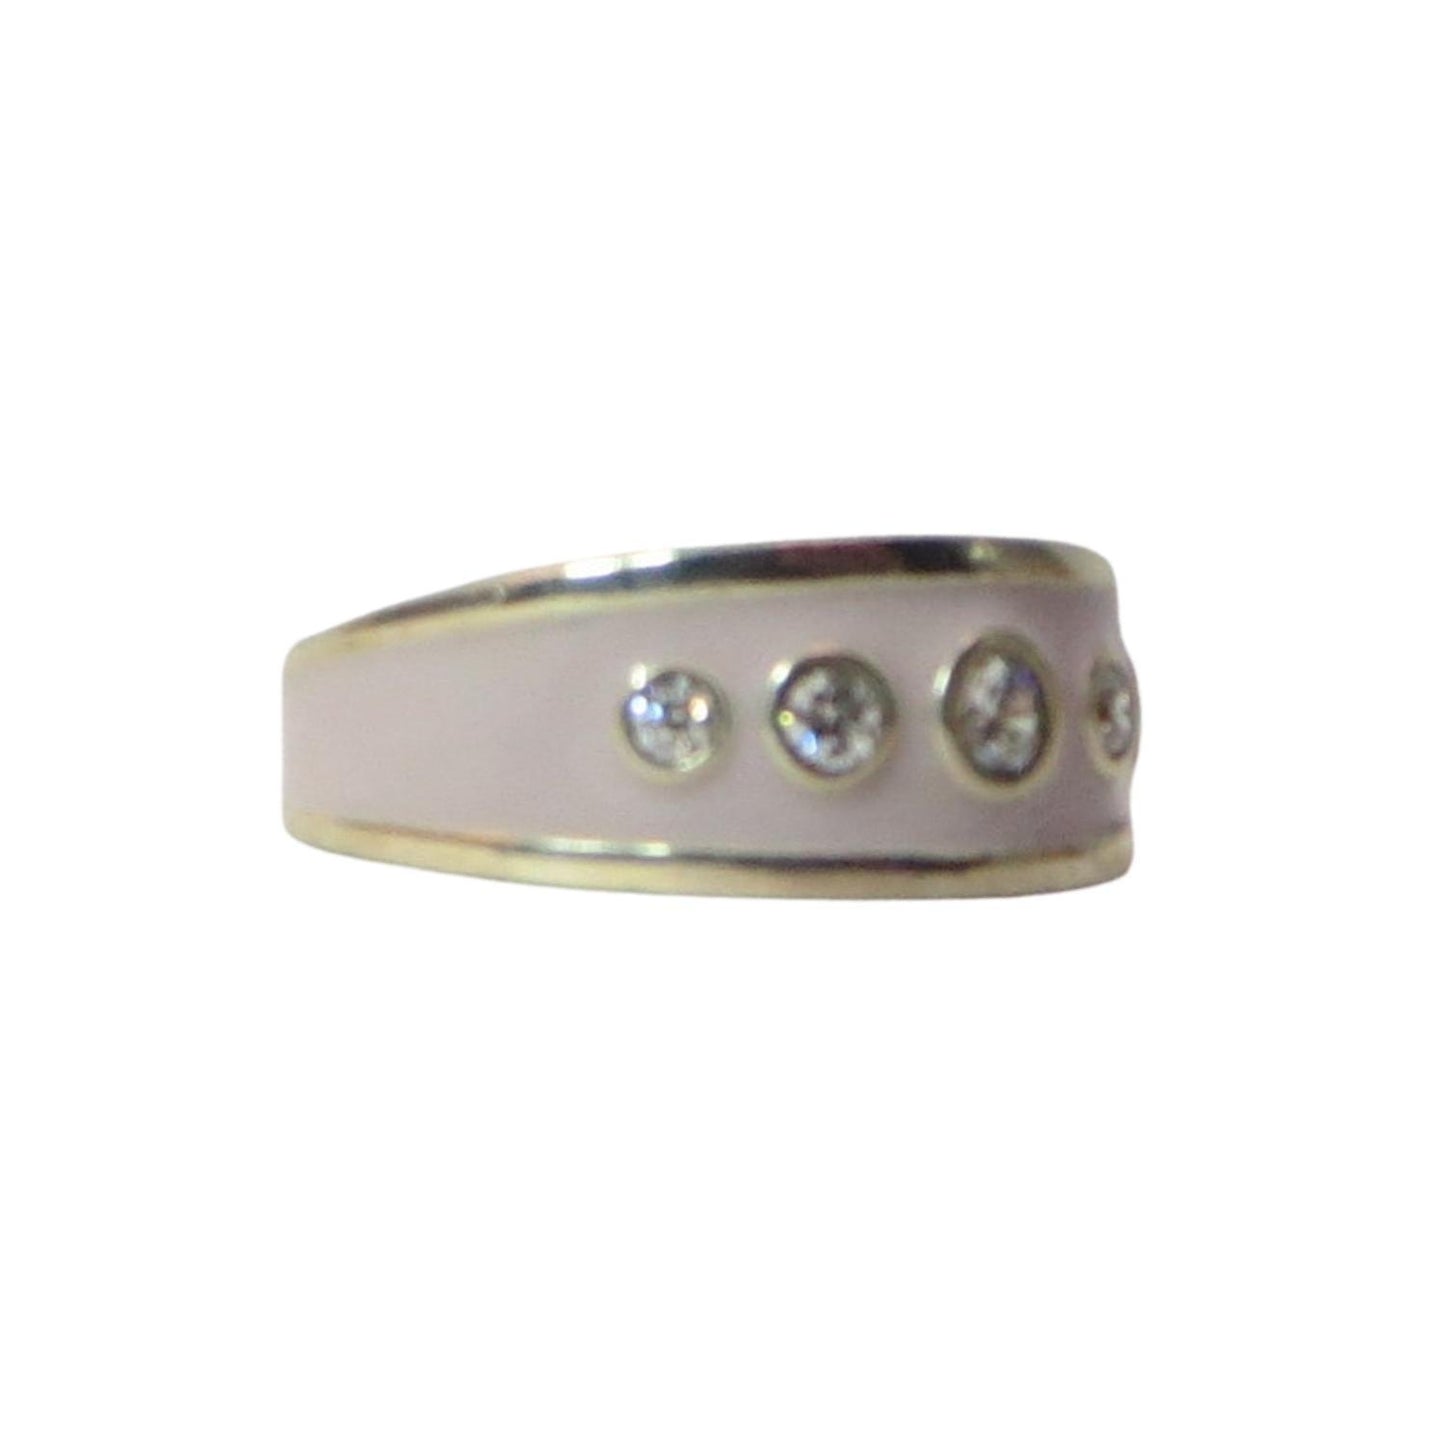 Pandora 190153EN11 PROMISE LAVENDER Sterling Silver and Lavender Enamel Ring.  A medium width band in light lavender enamel dotted with clear CZs.